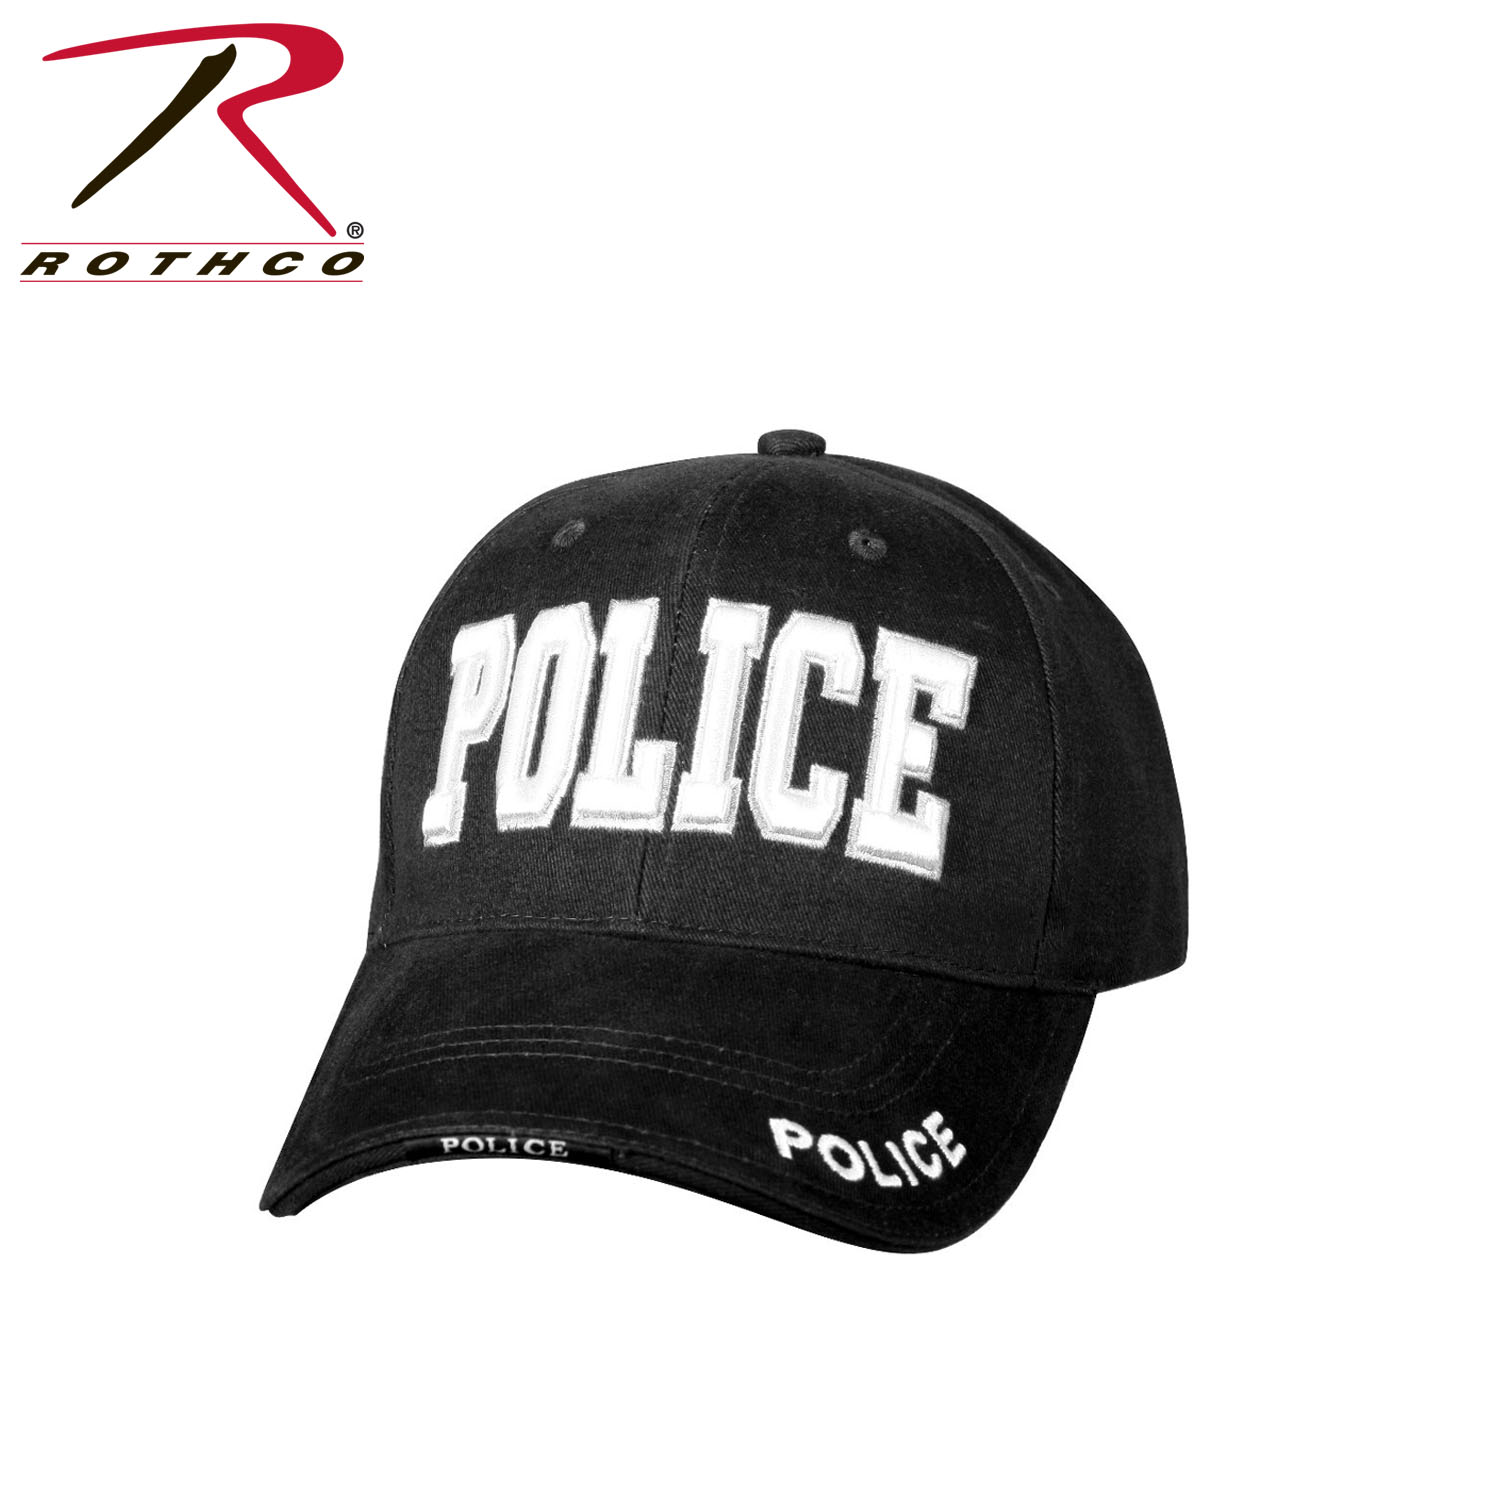 Rothco Deluxe Police Low Profile